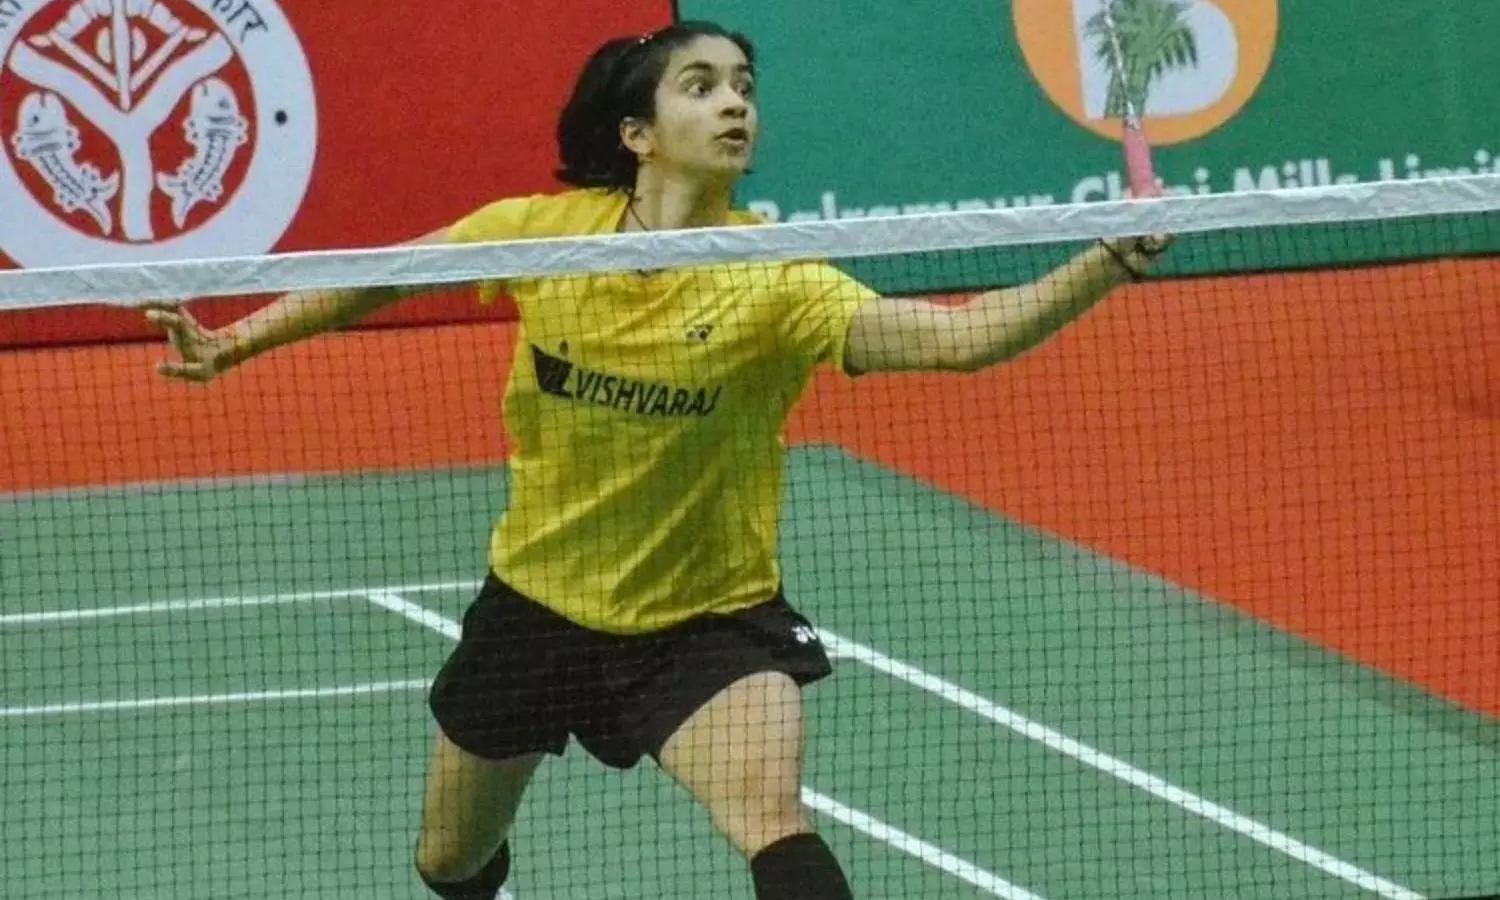 National Games 2022 LIVE Day 6 Aakarshi faces Malvika in Badminton singles final- Updates, Scores, Live